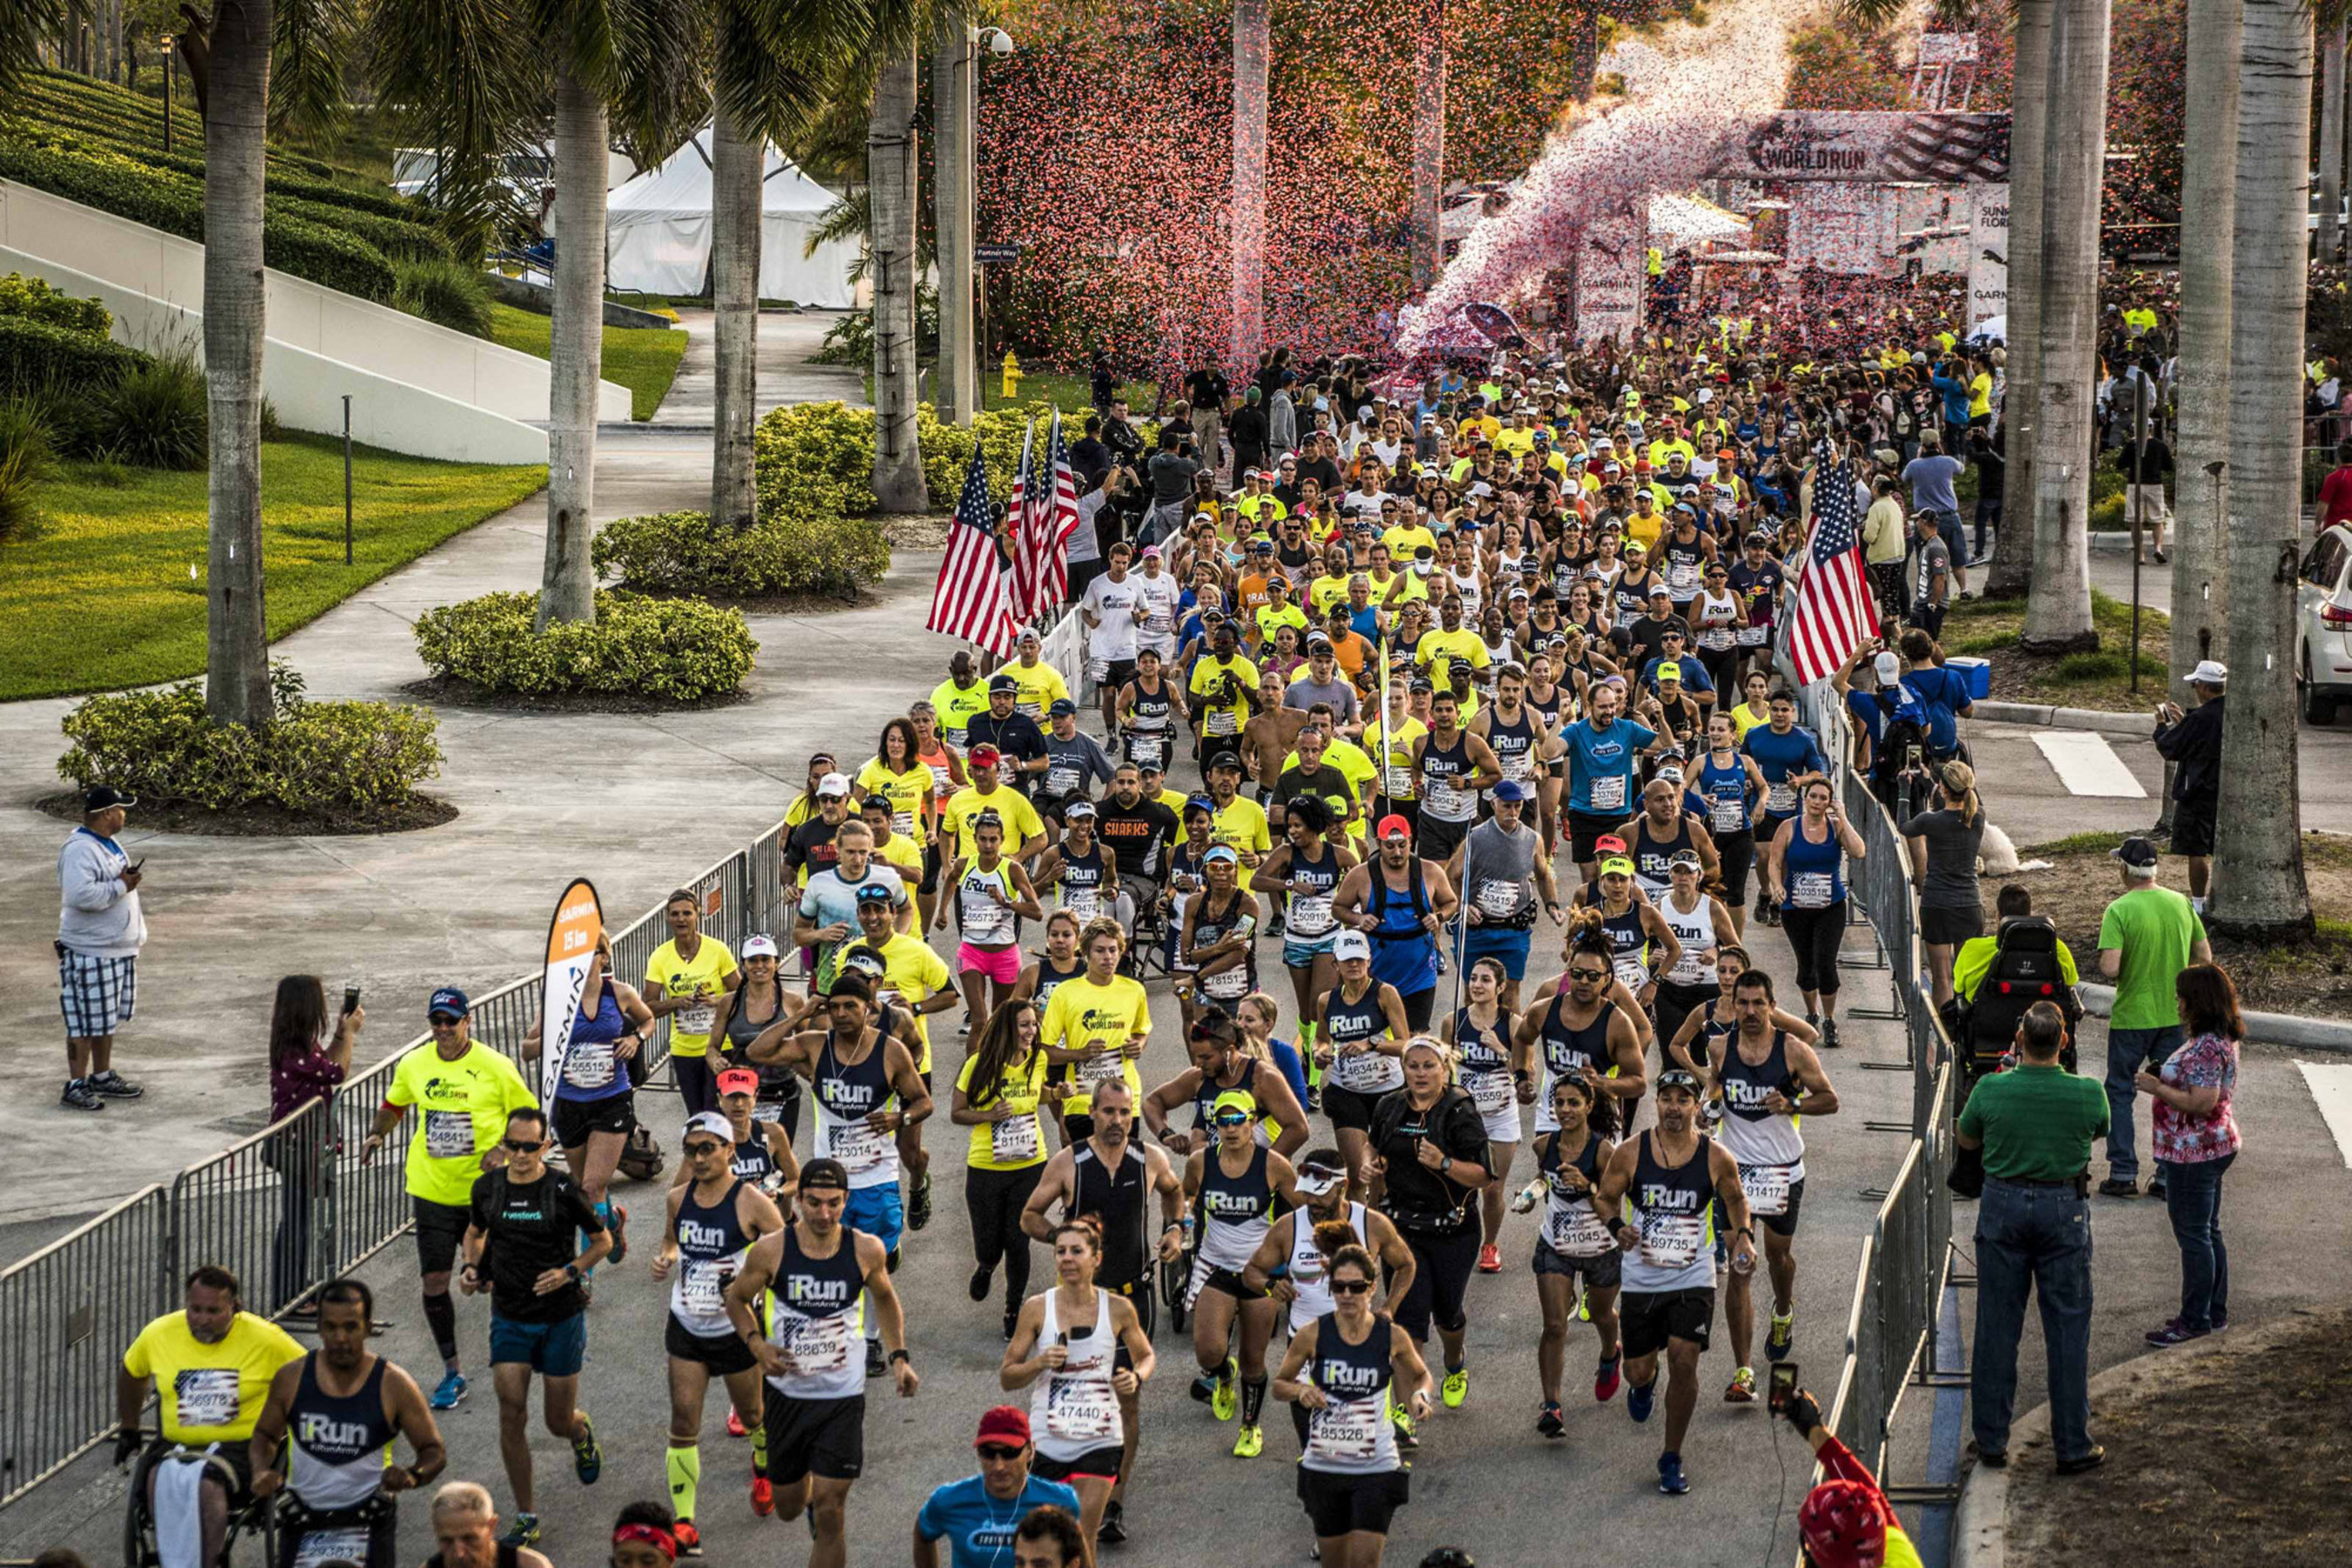 Participants in the Wings for Life World Run take off Sunday morning in Sunrise, Fla., one of 34 locations around the world shining a light on spinal cord injury research.